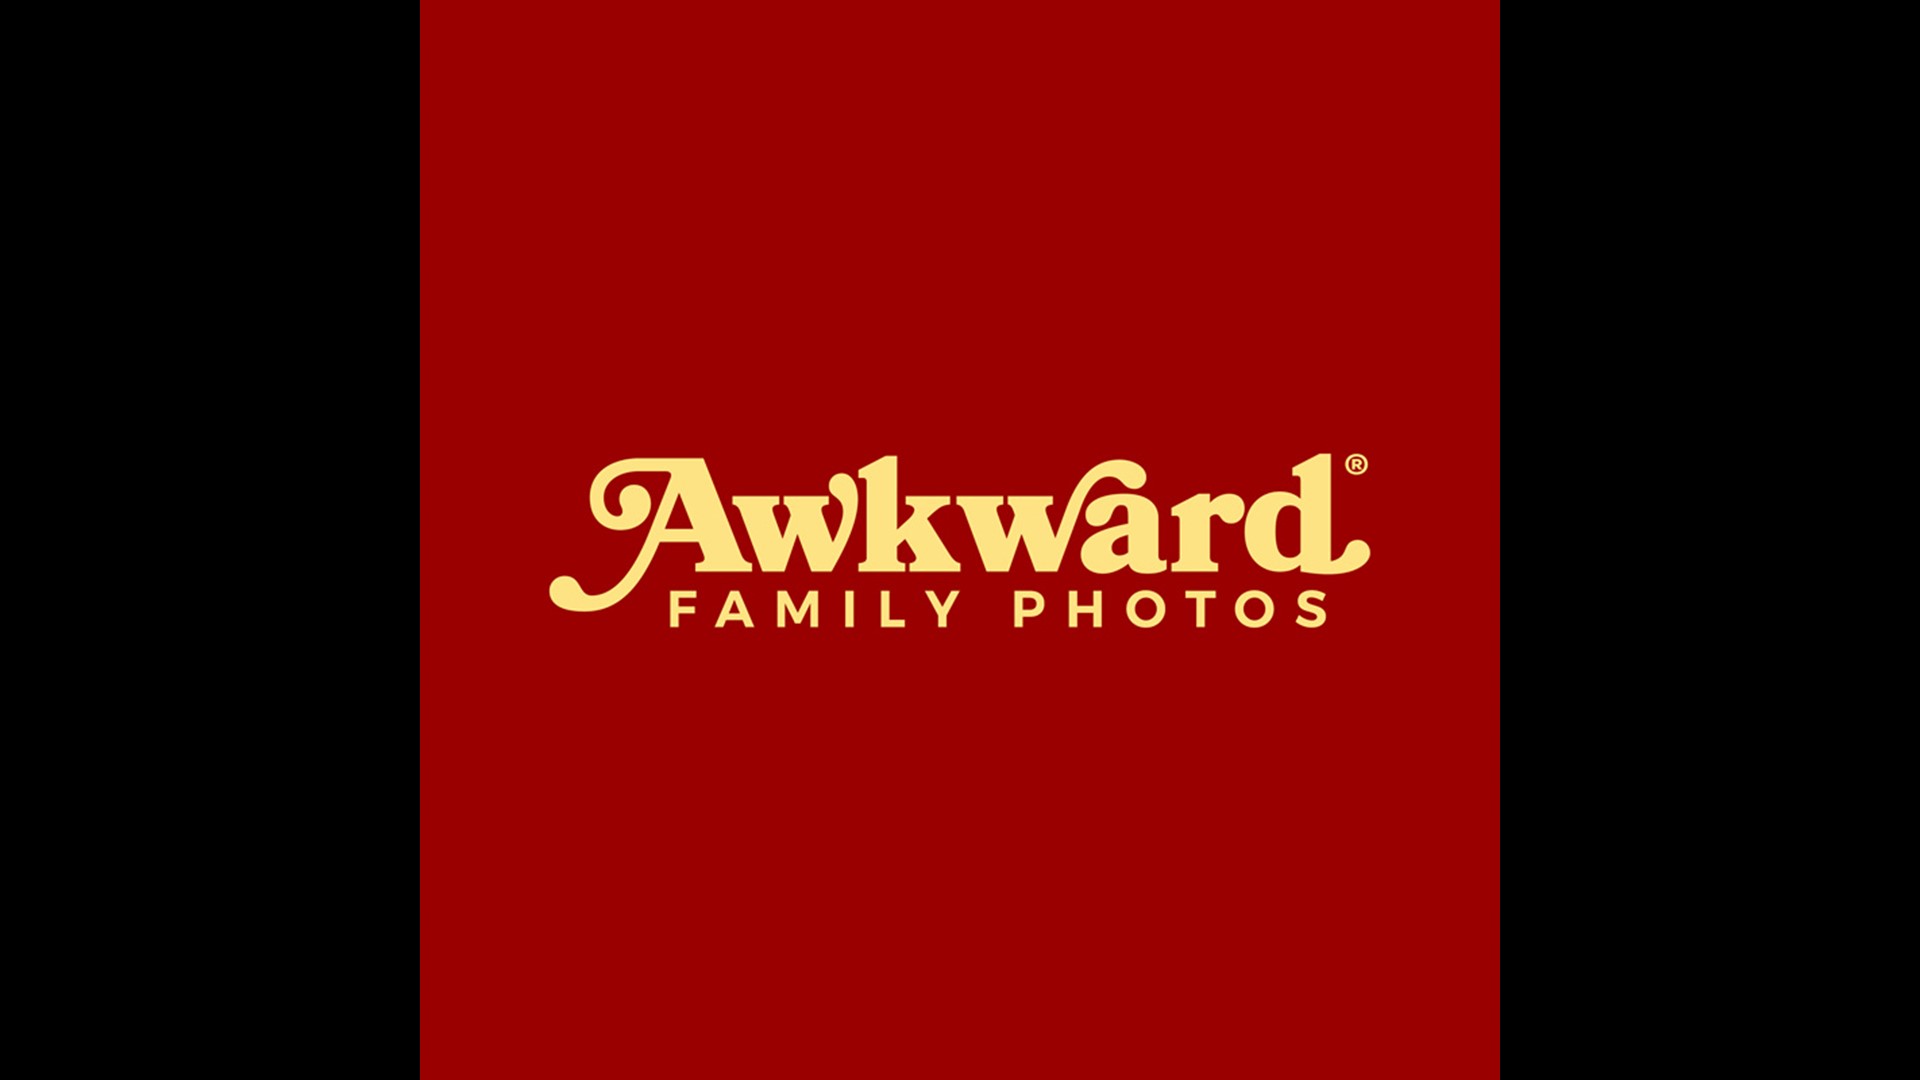 Check out more awkward pics or submit your own on social, @AwkwardFamilyPhotos.